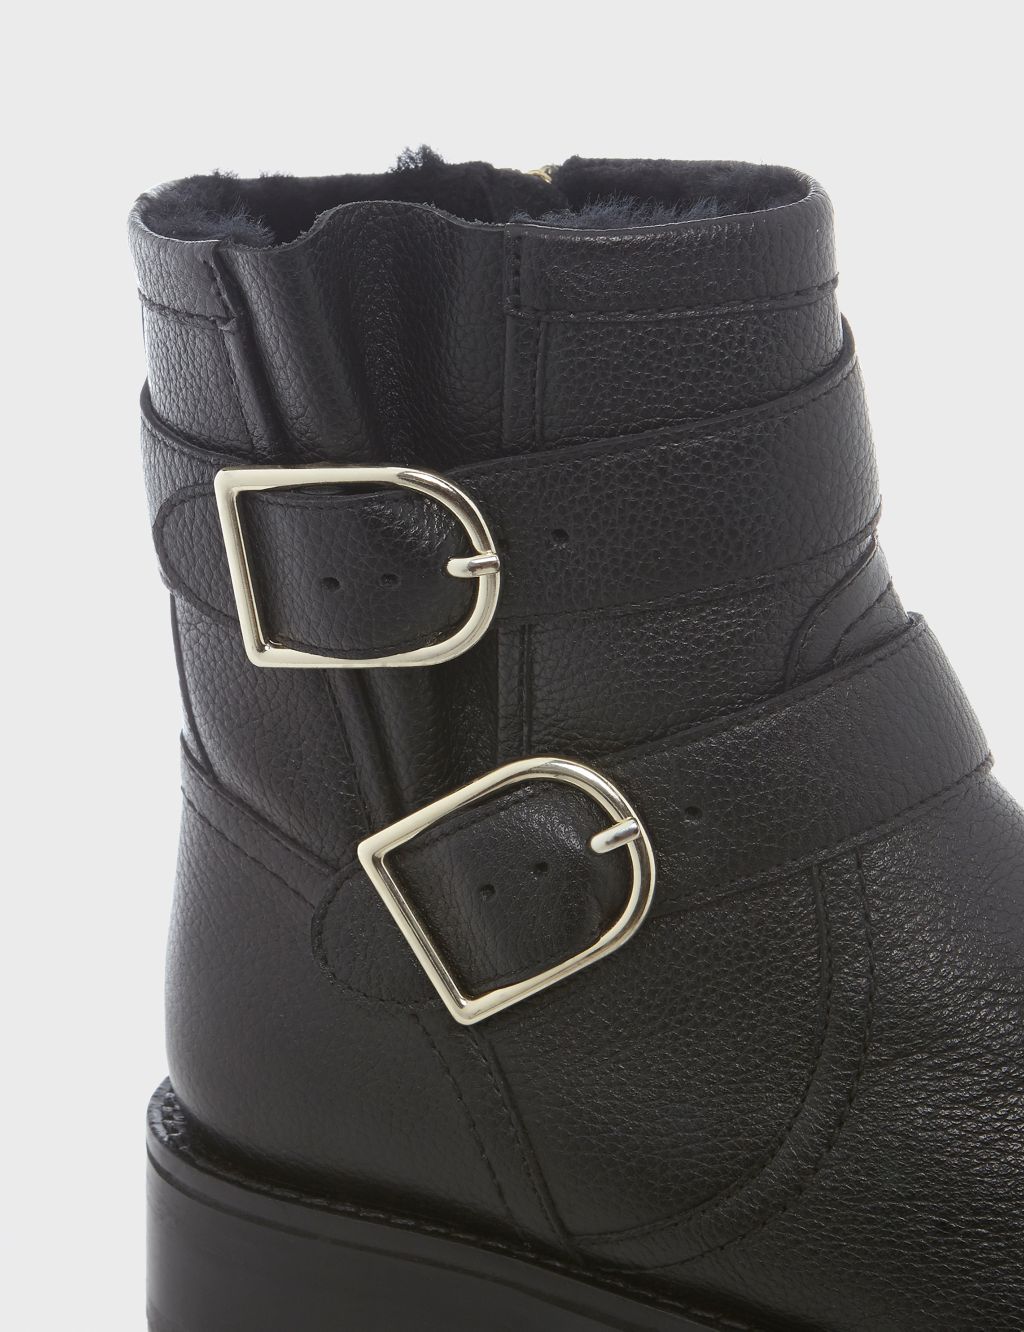 Leather Patent Biker Block Heel Ankle Boots image 3